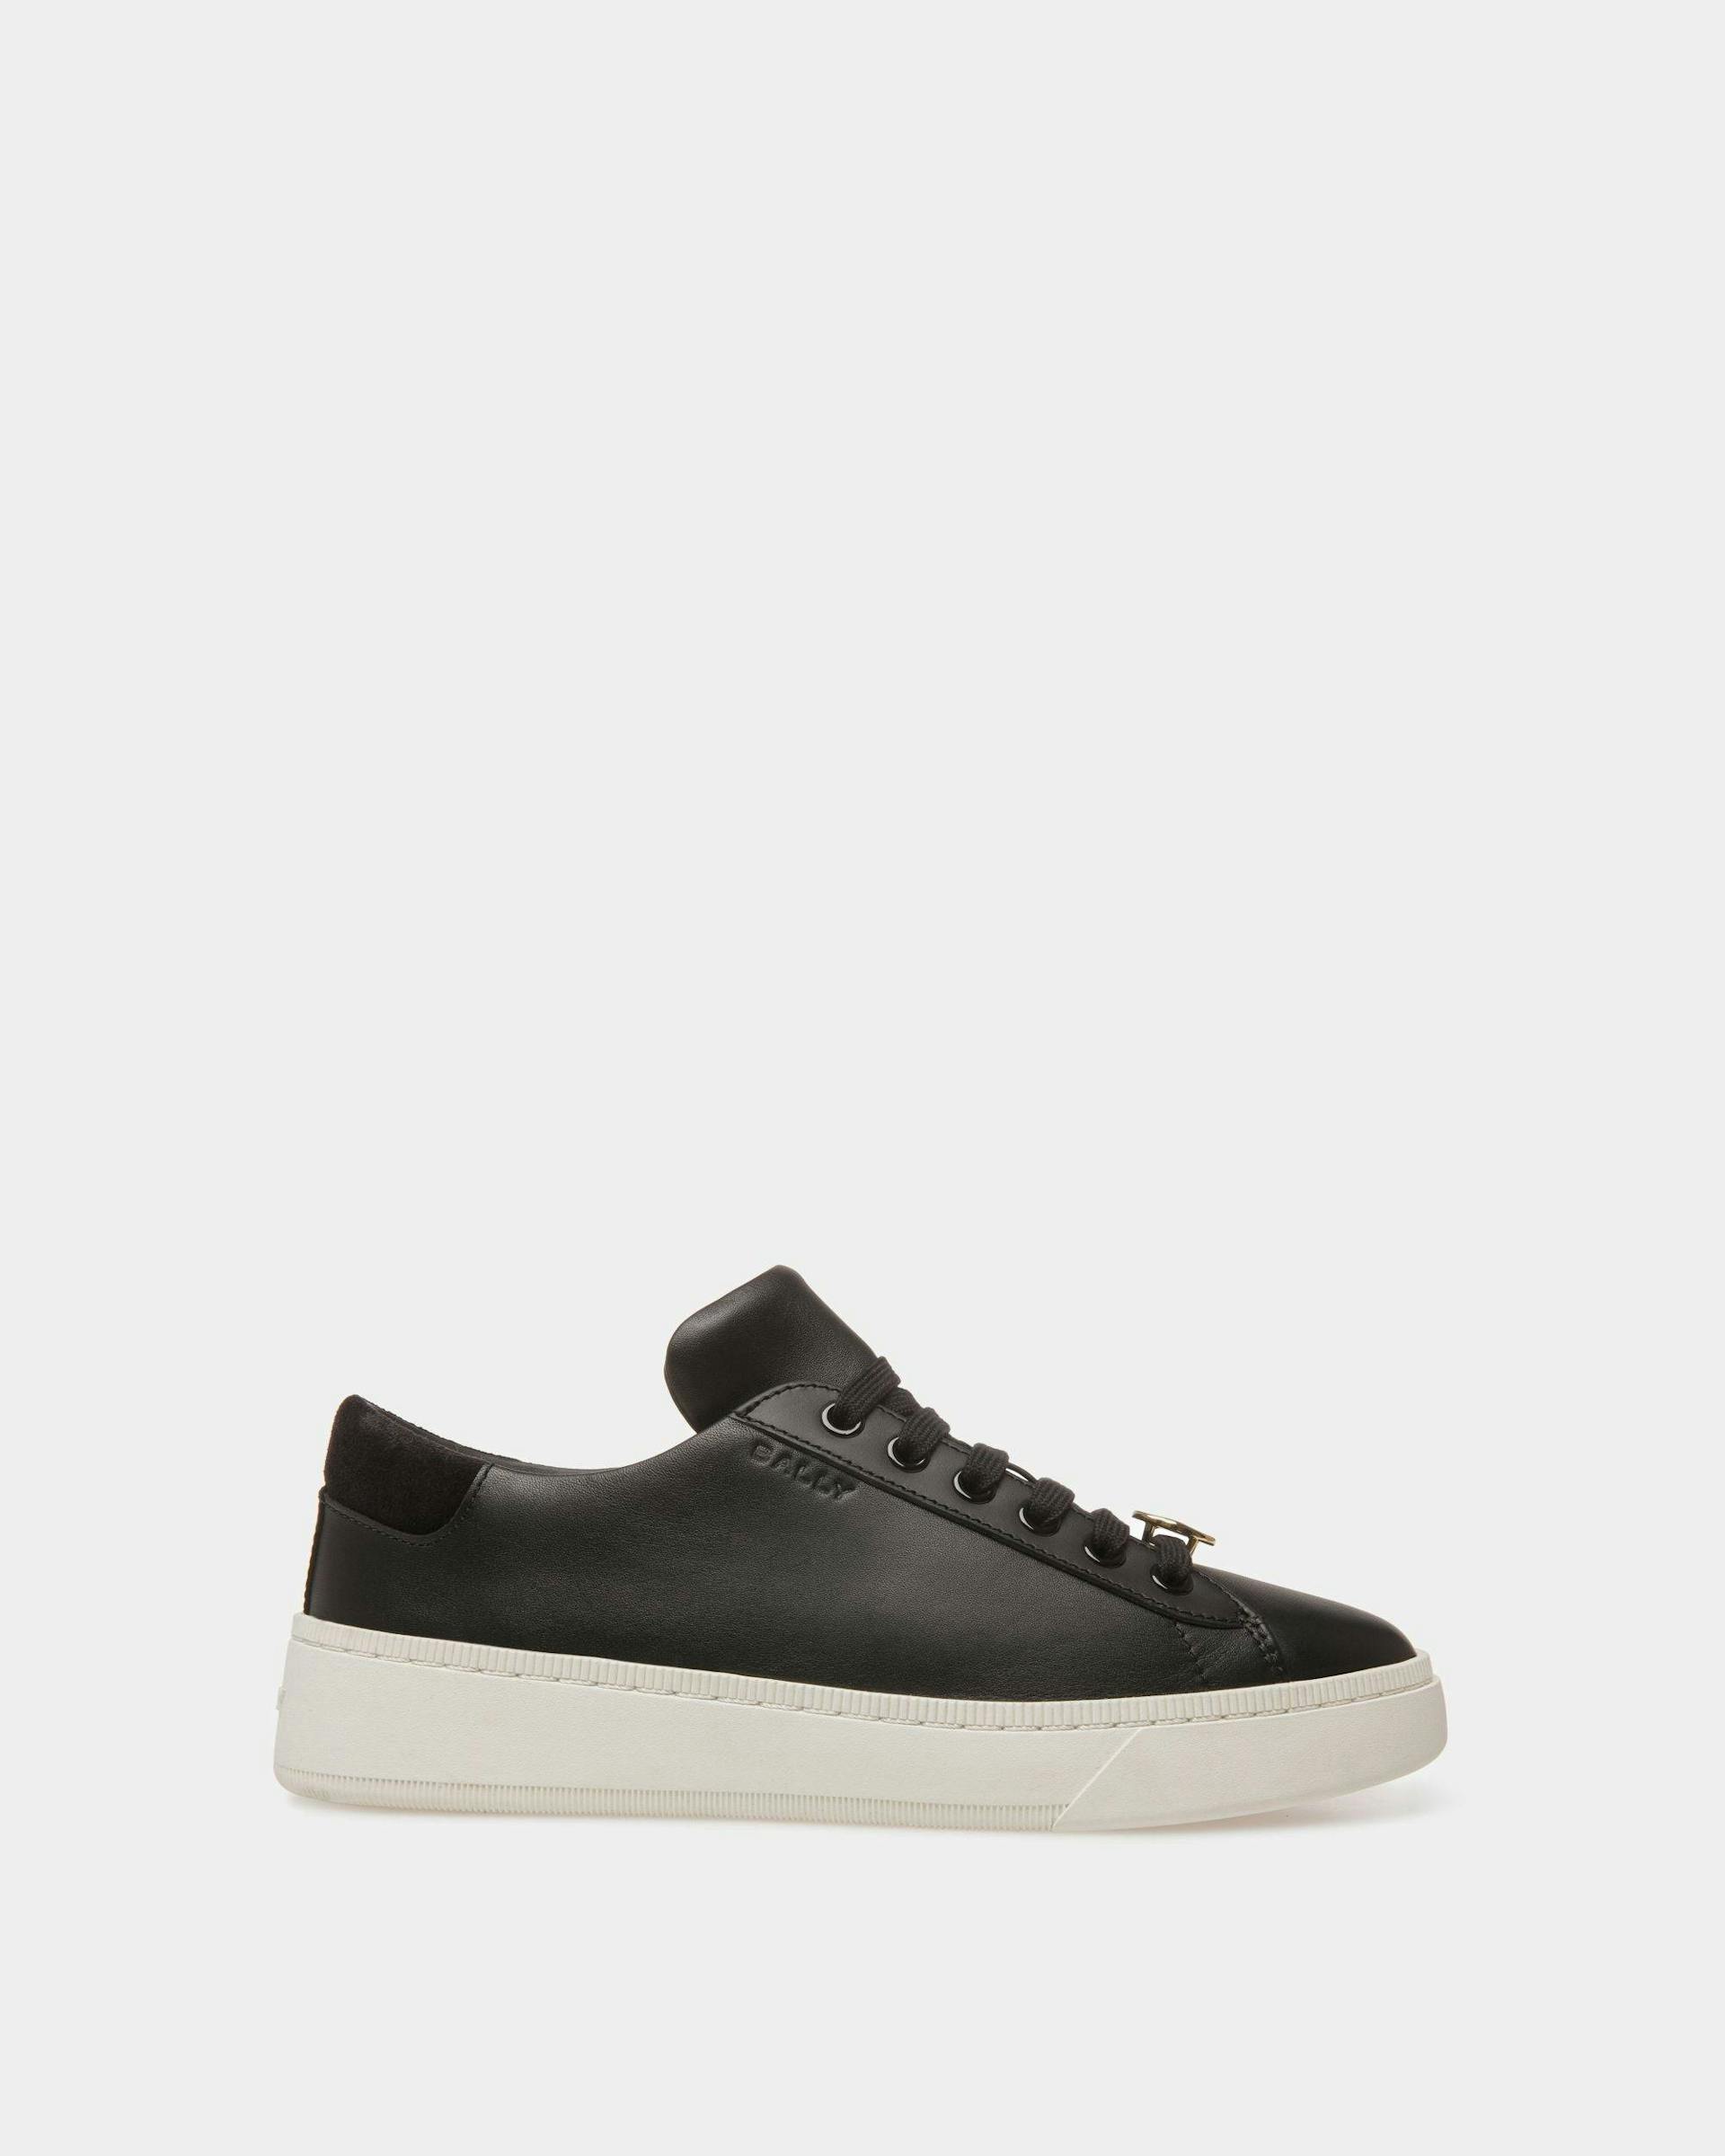 Raise Sneakers In Black And White Leather - Women's - Bally - 01